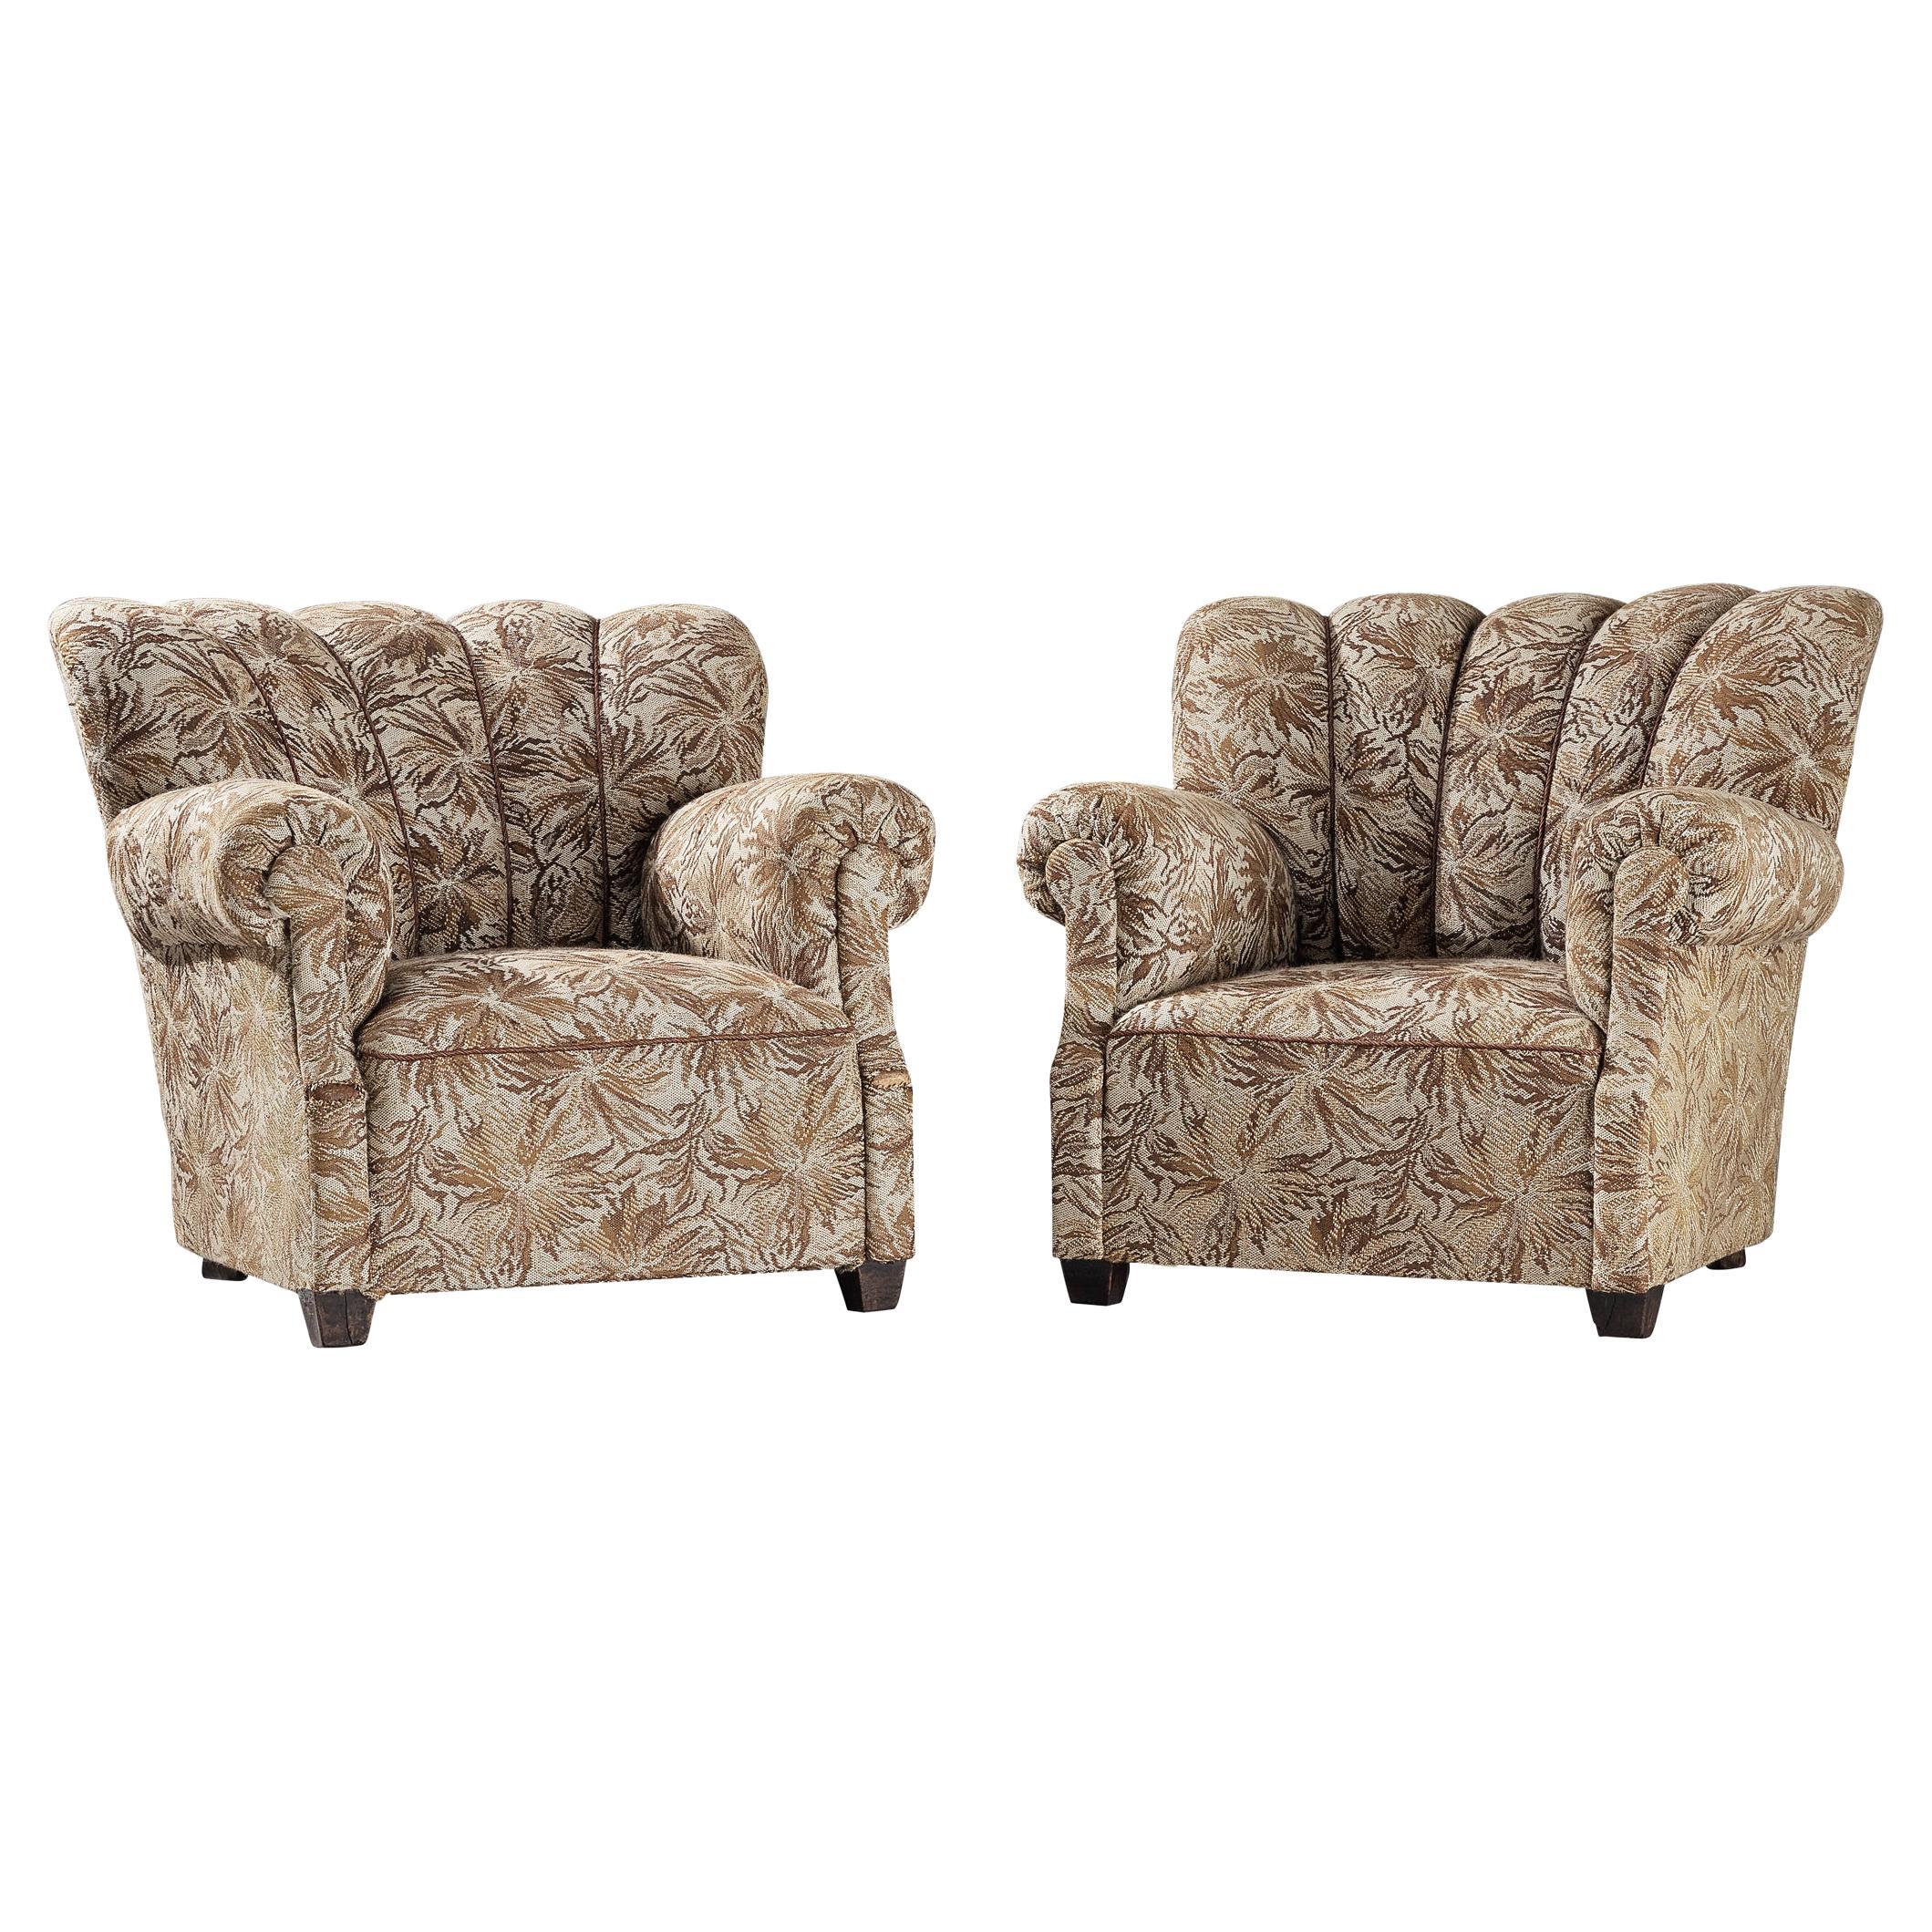 Lounge Chairs in Brown and Beige Floral Upholstery